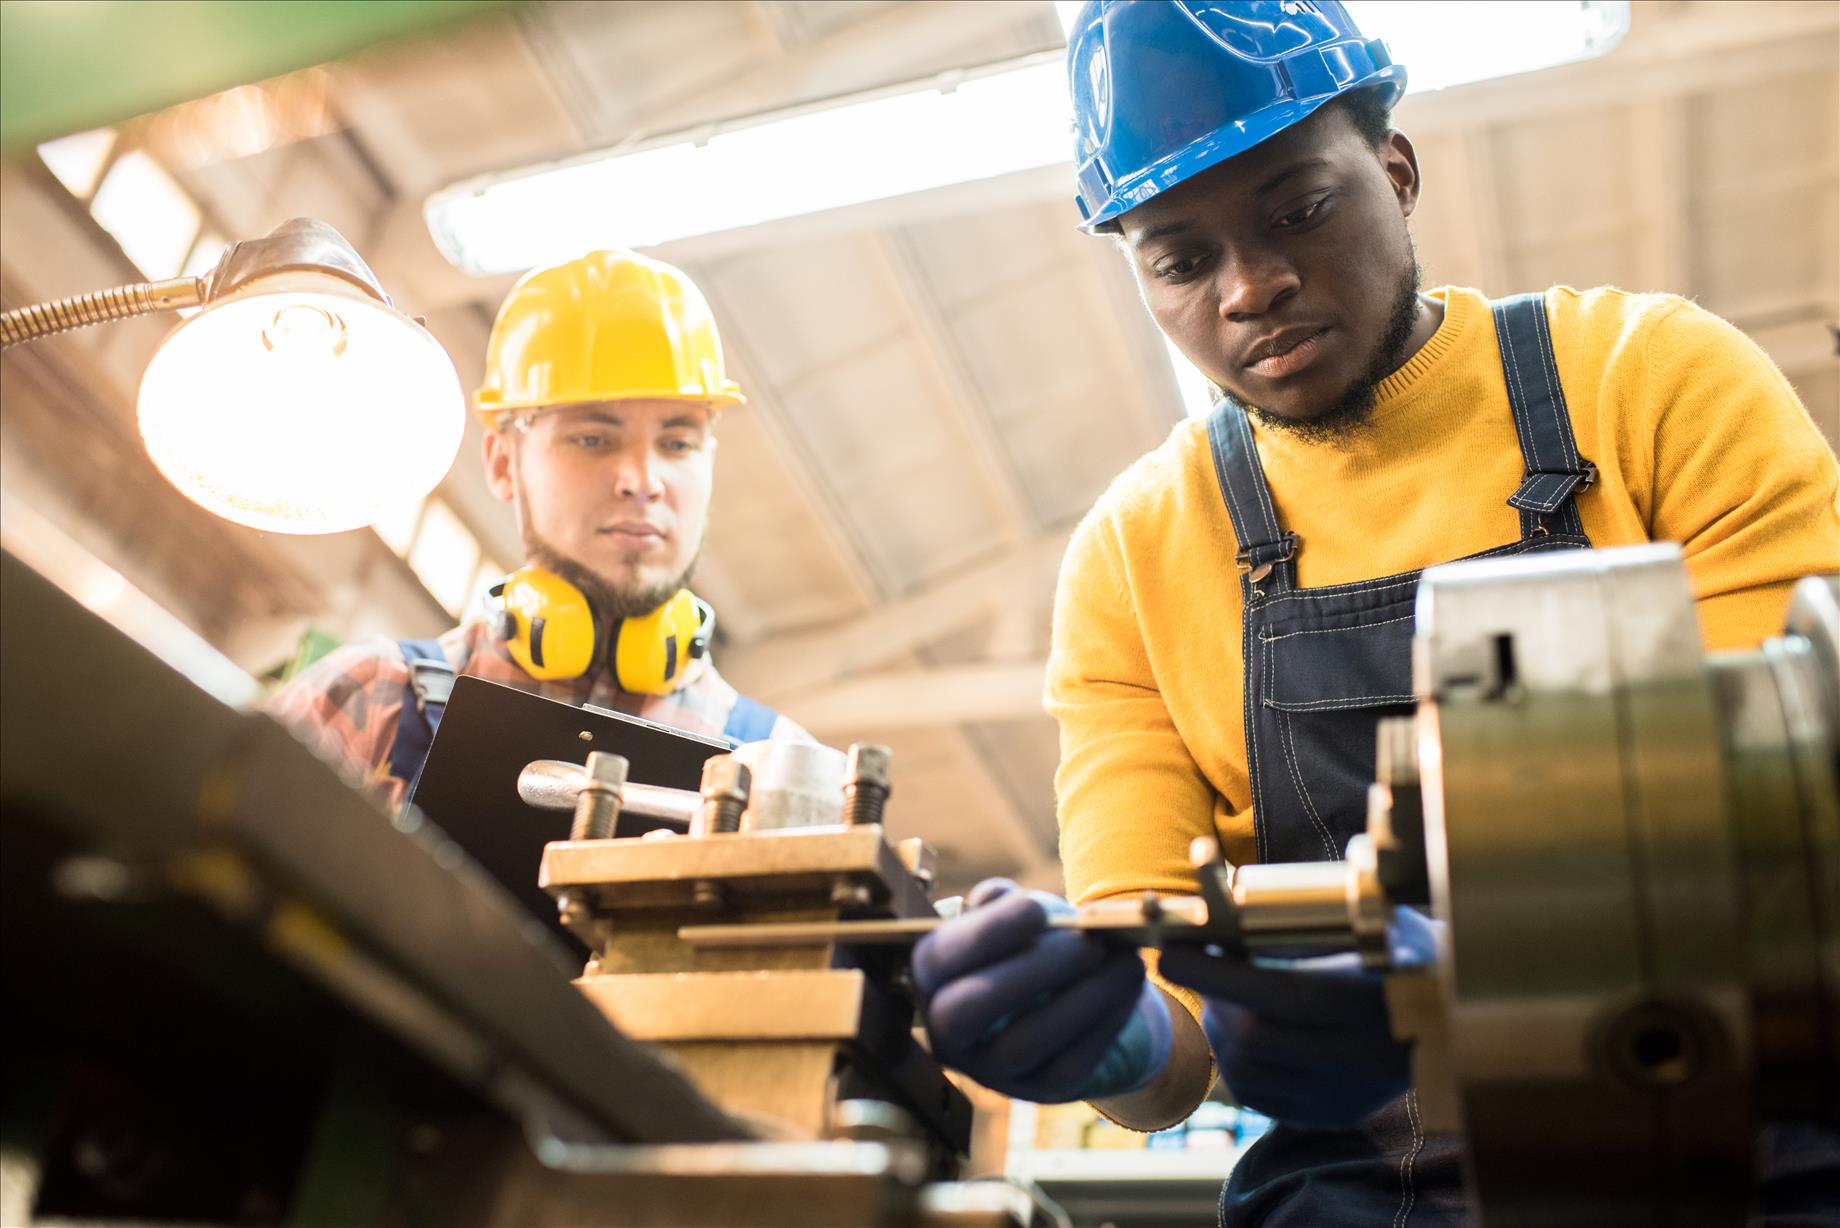 Skills Shortages Are Plaguing South Africa's Economy - Policy And Social Conditions Must Support Their Development